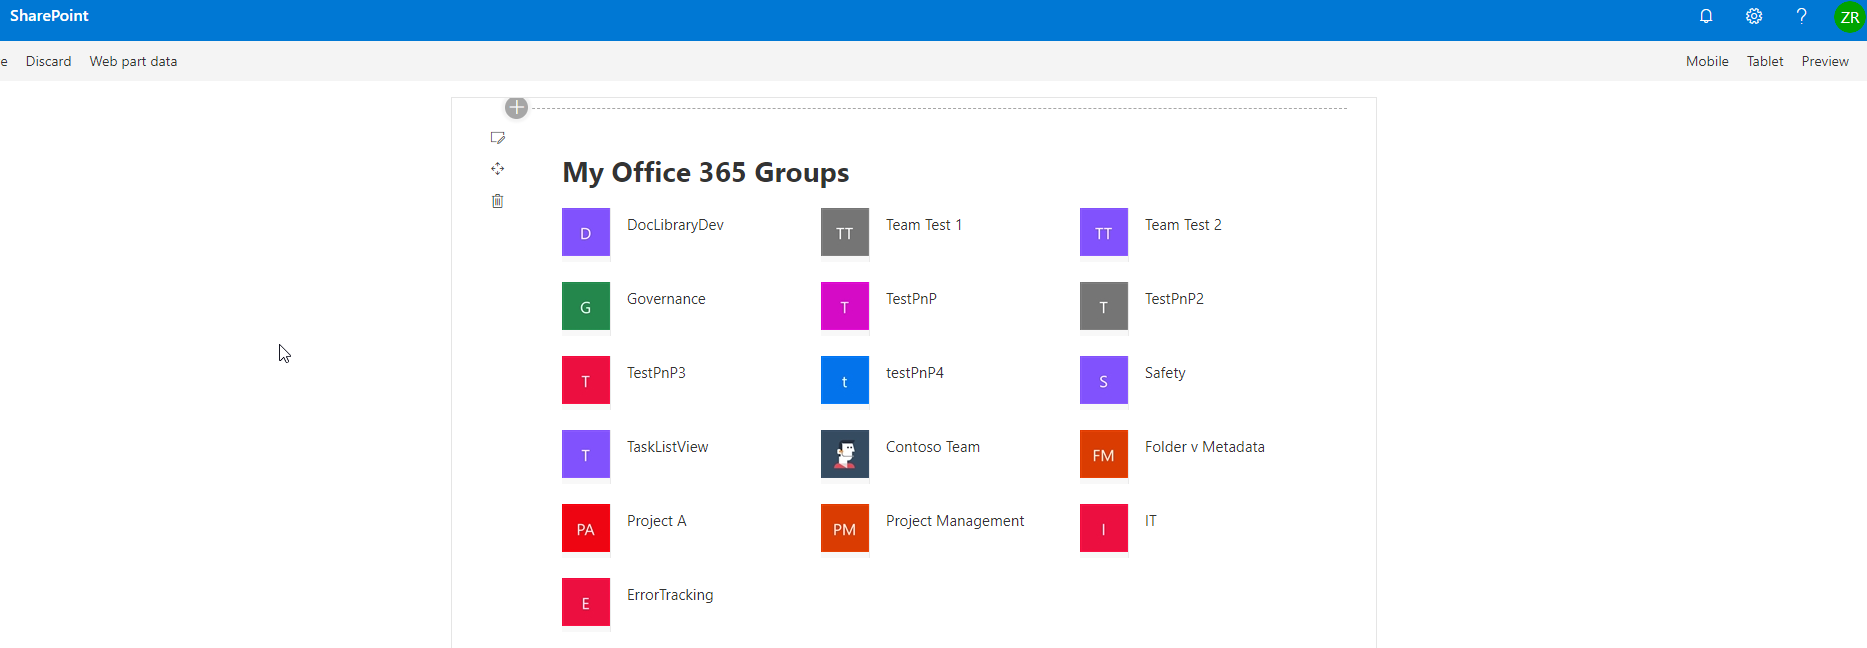 My Office 365 Groups Web Part - Update!